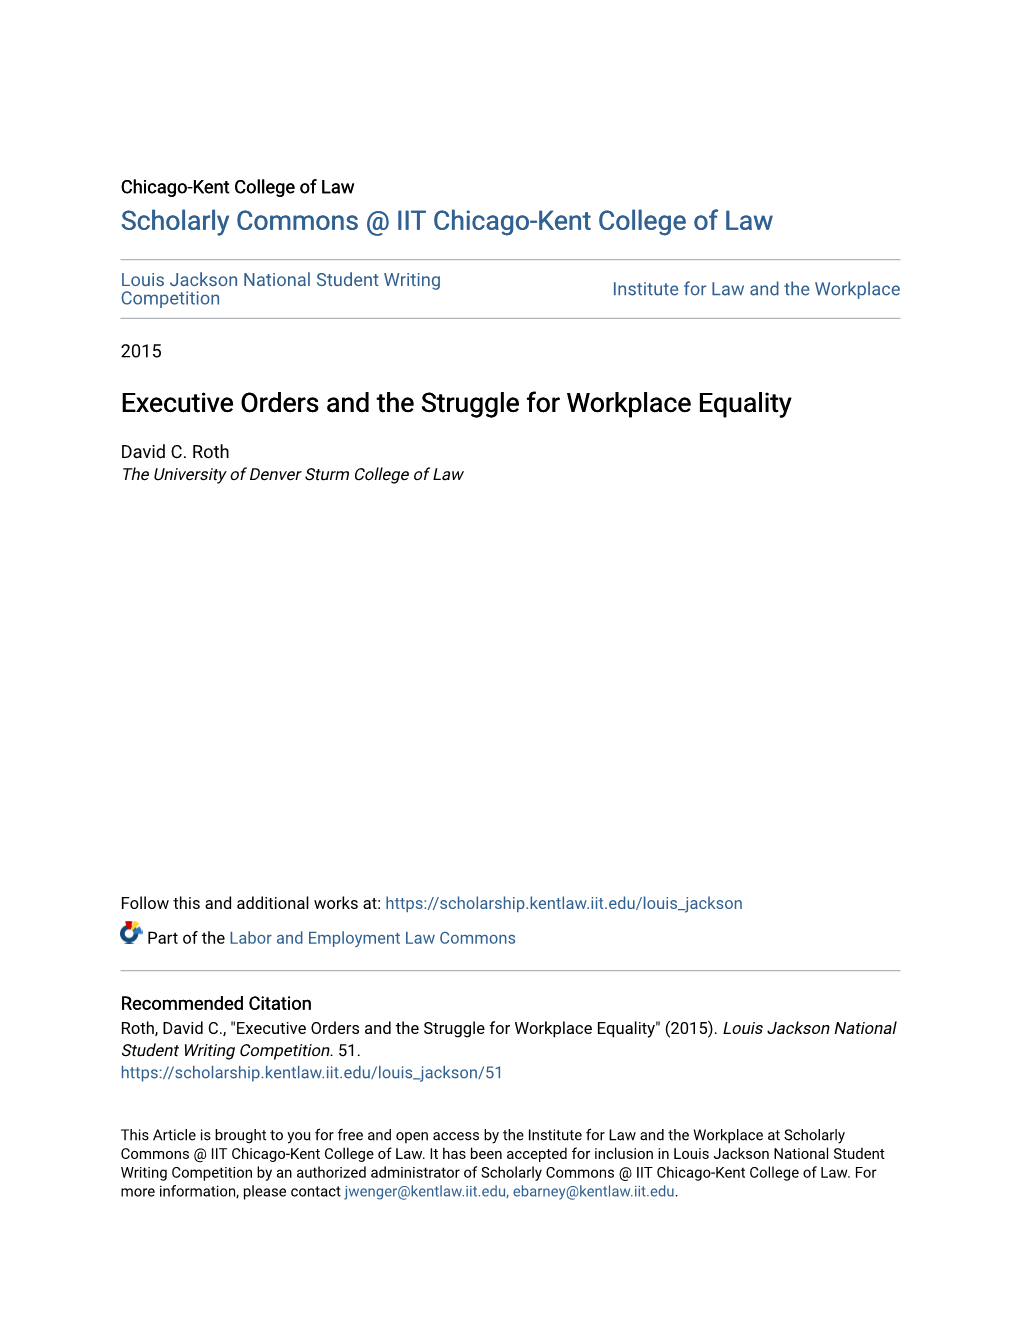 Executive Orders and the Struggle for Workplace Equality